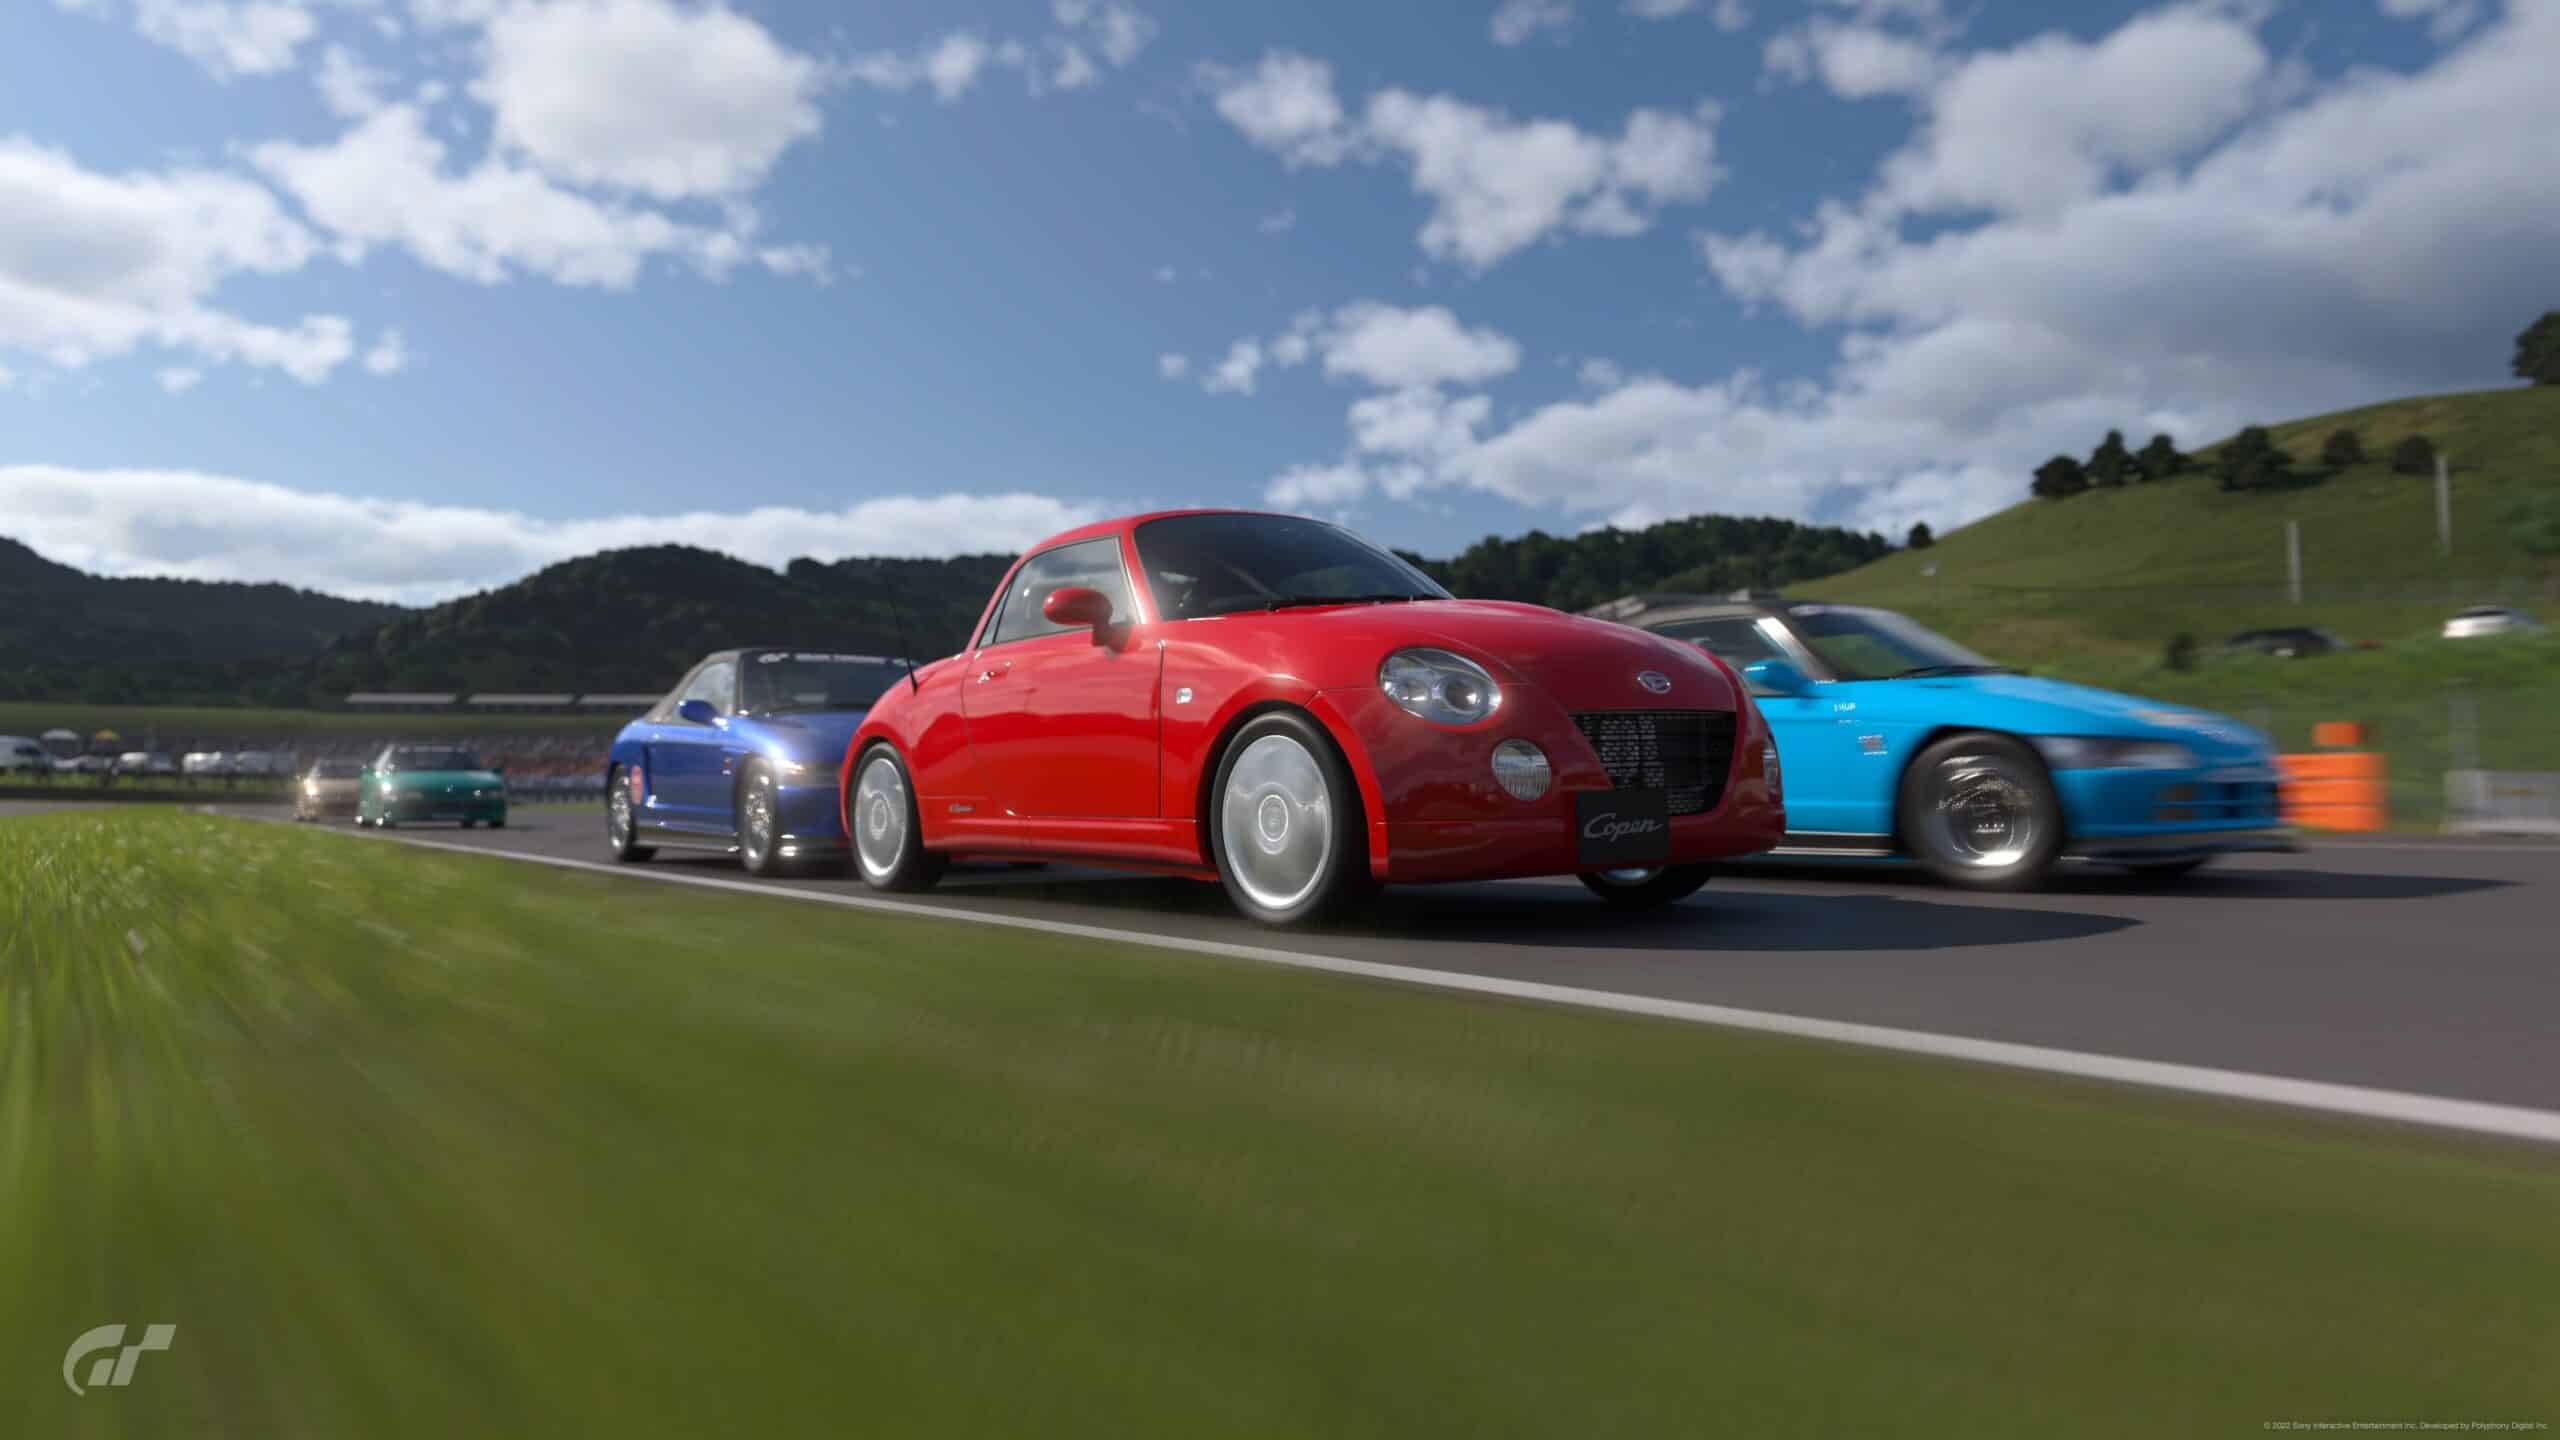 Better sound, better graphics, better physics—the Gran Turismo 7 review